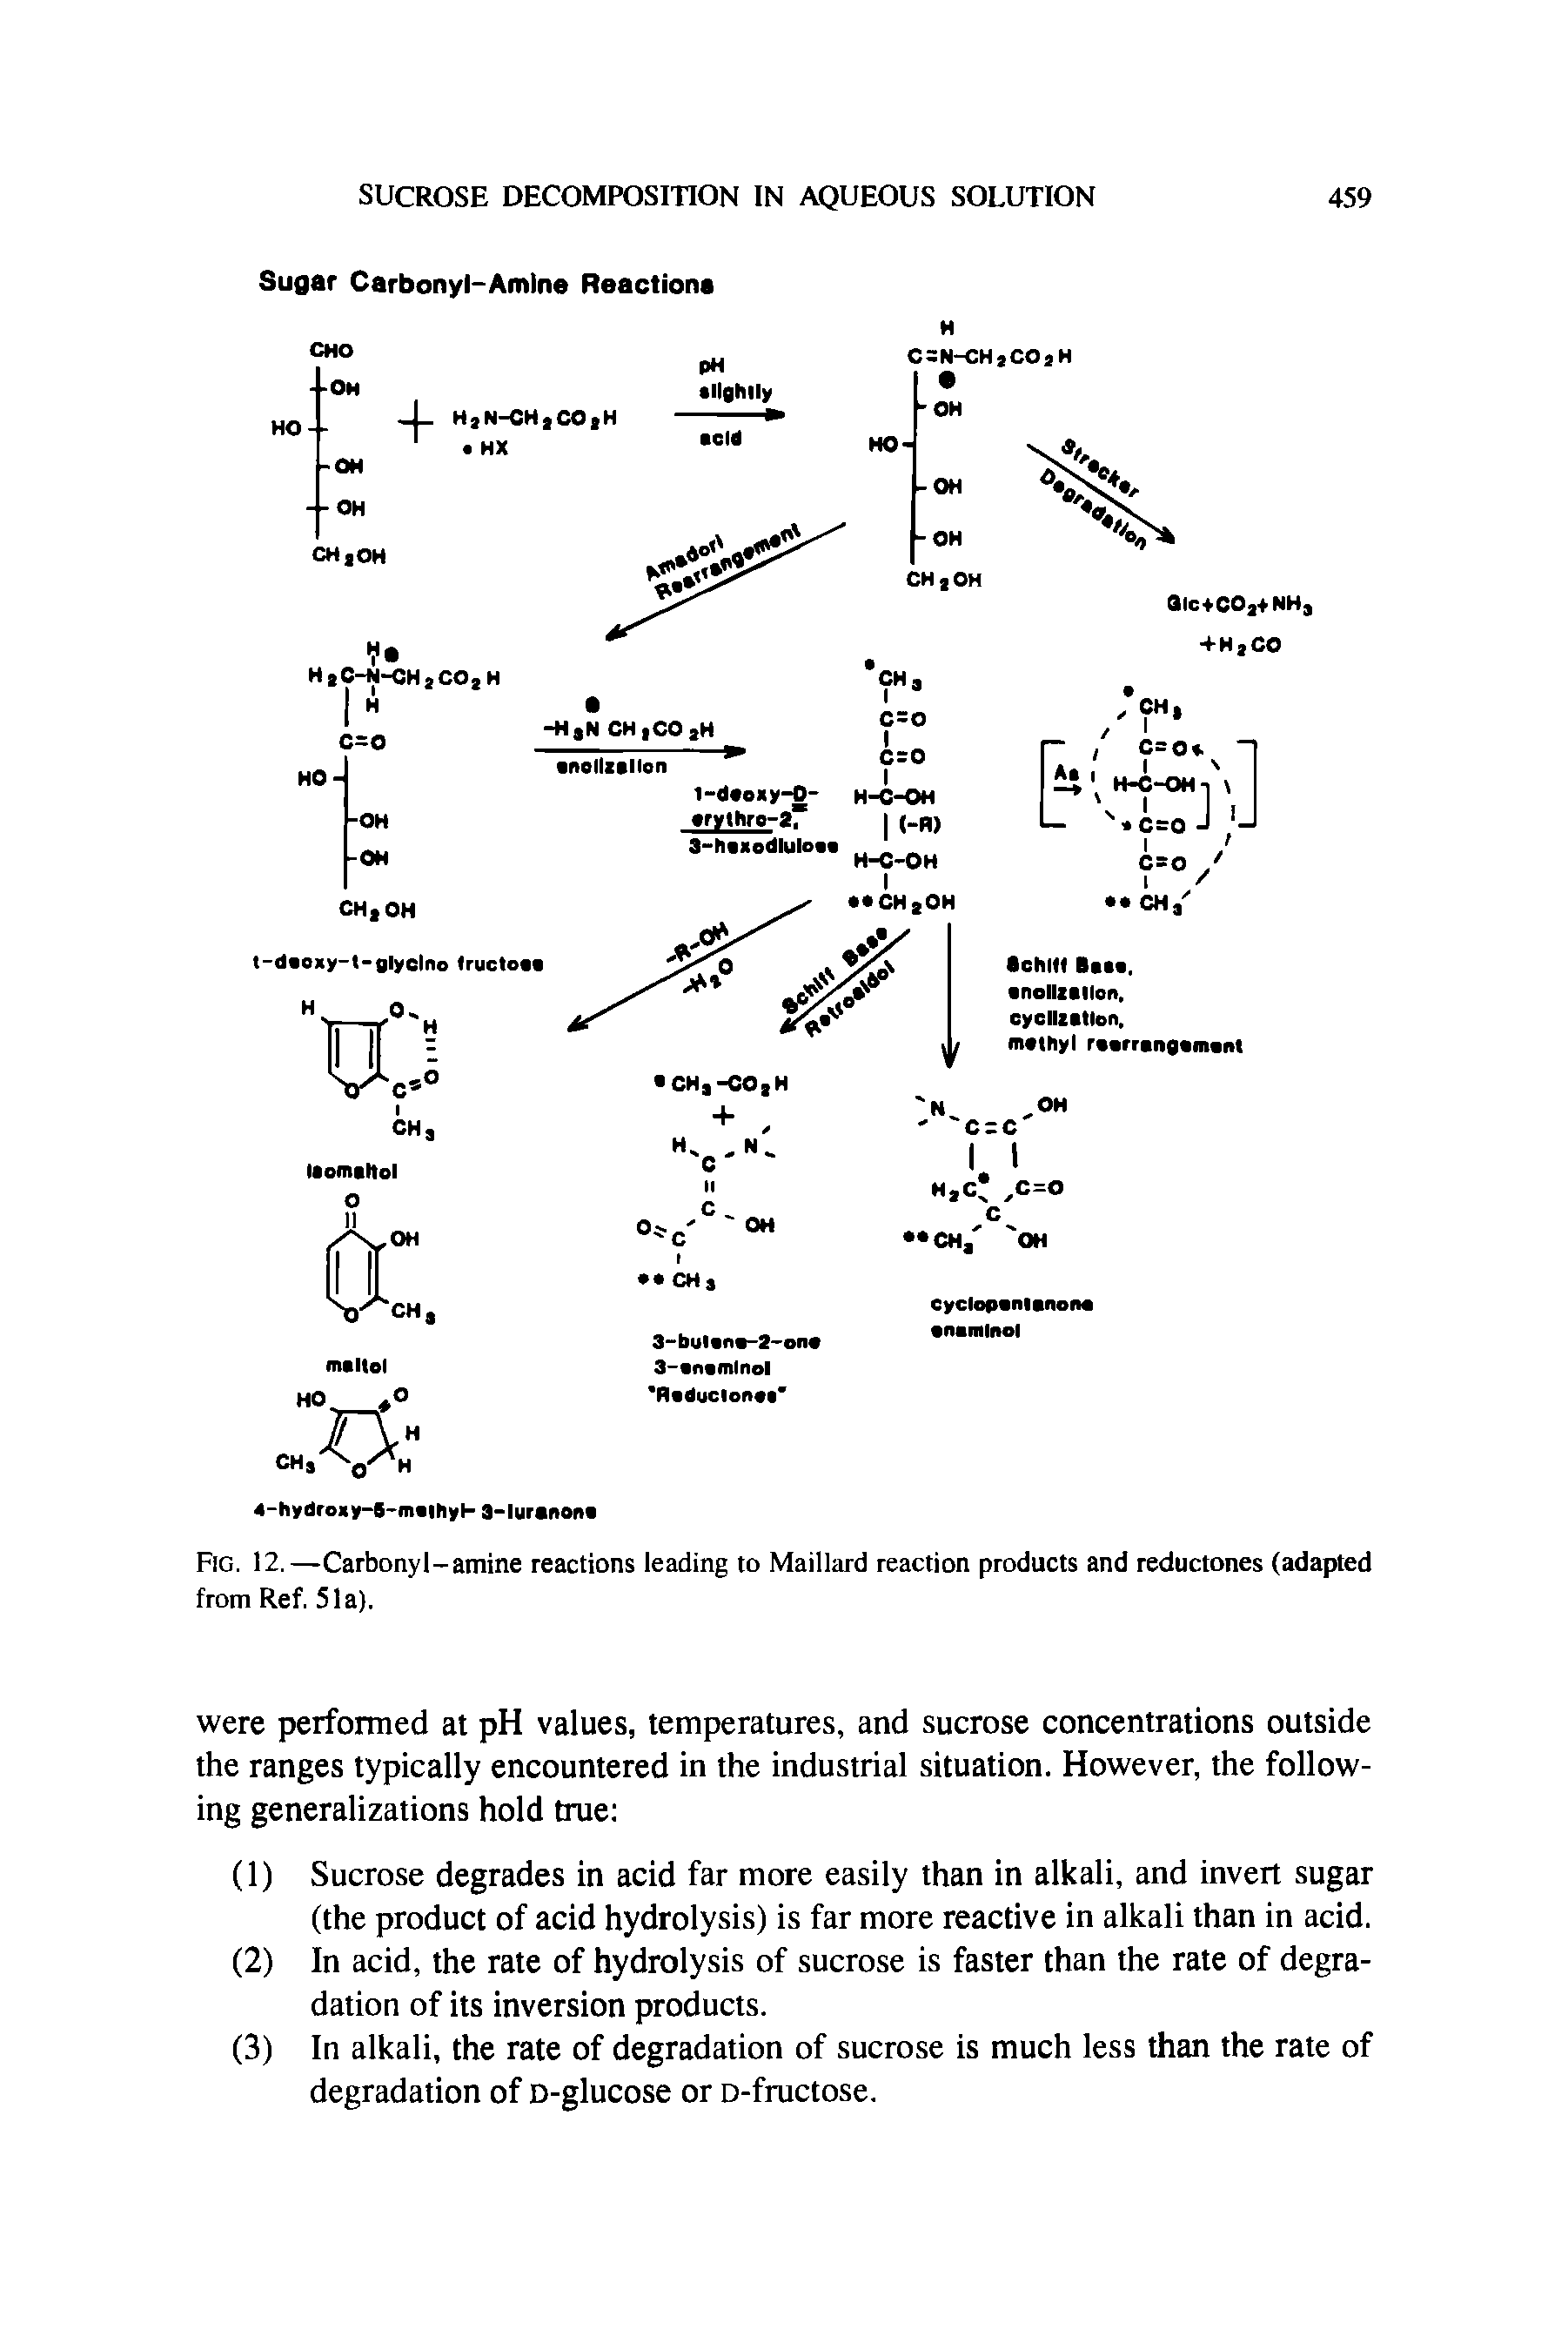 Fig. 12.—Carbonyl-amine reactions leading to Maillard reaction products and reductones (adapted from Ref. 51a).